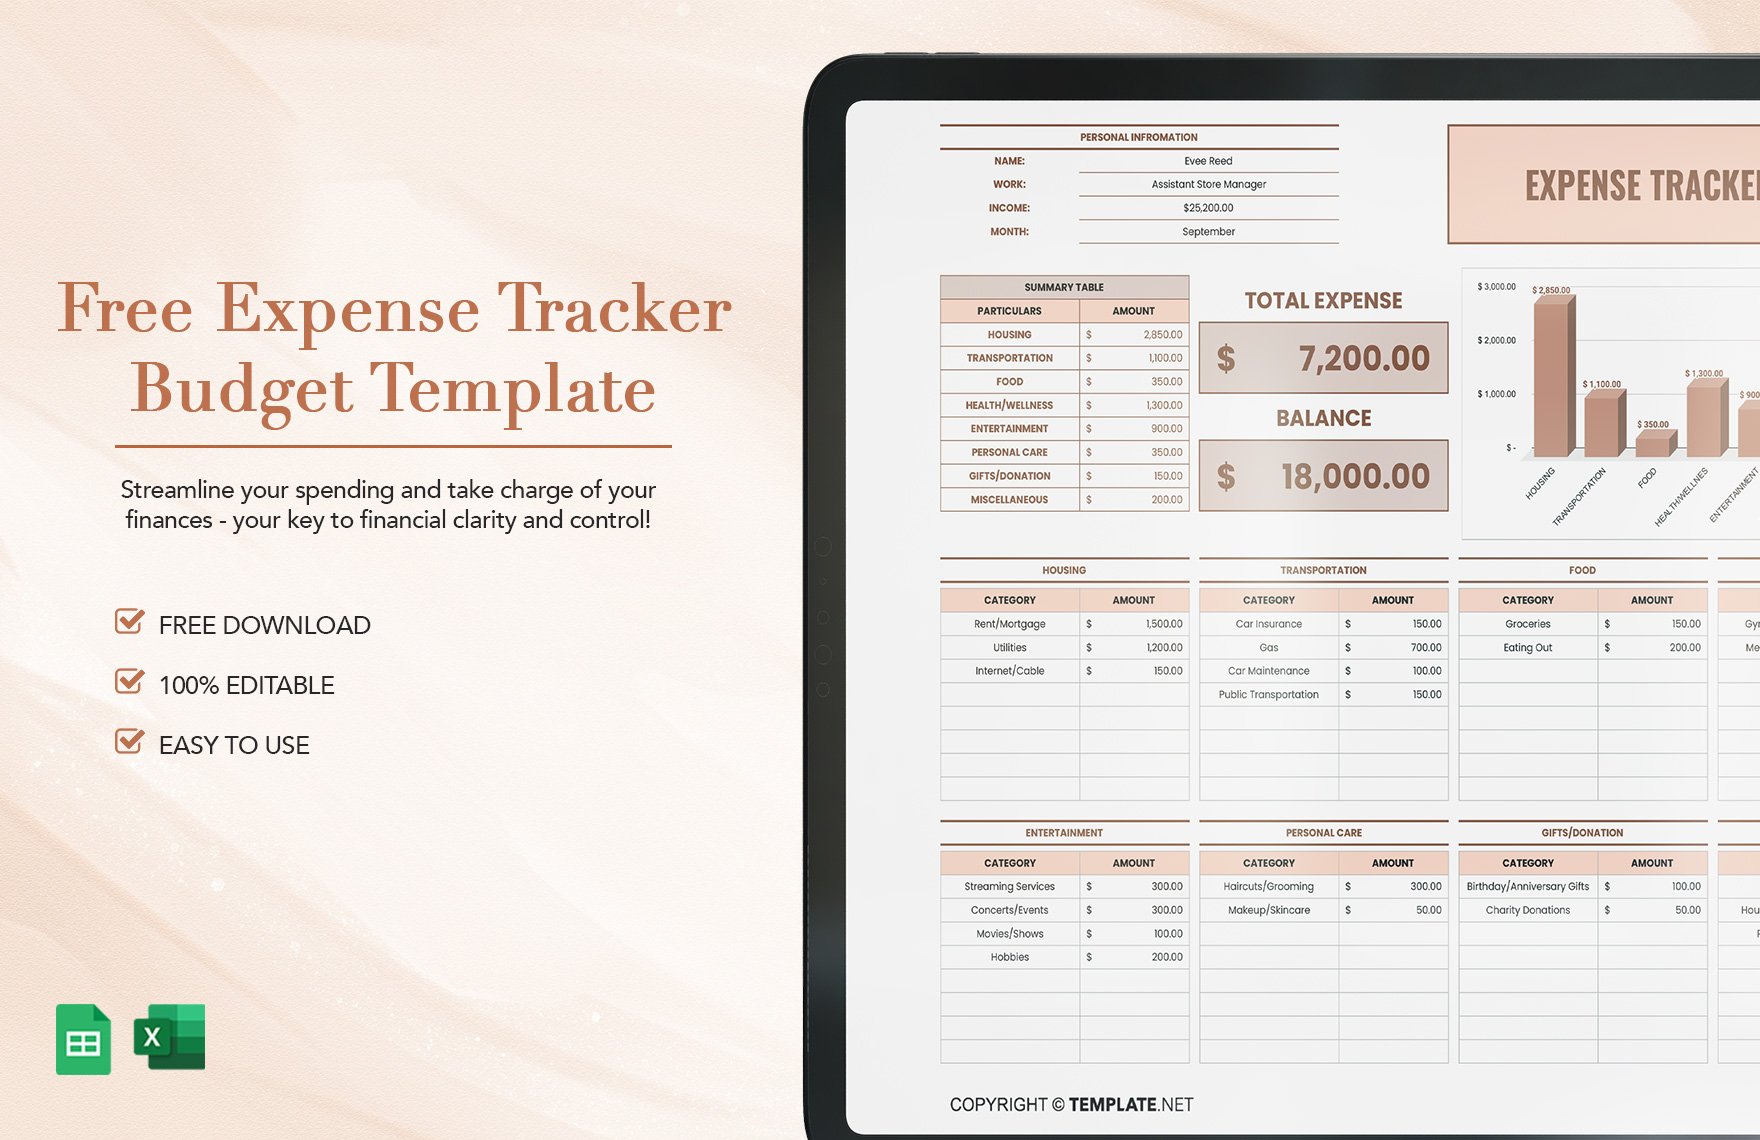 Free Expense Tracker Budget Template in Excel, Google Sheets